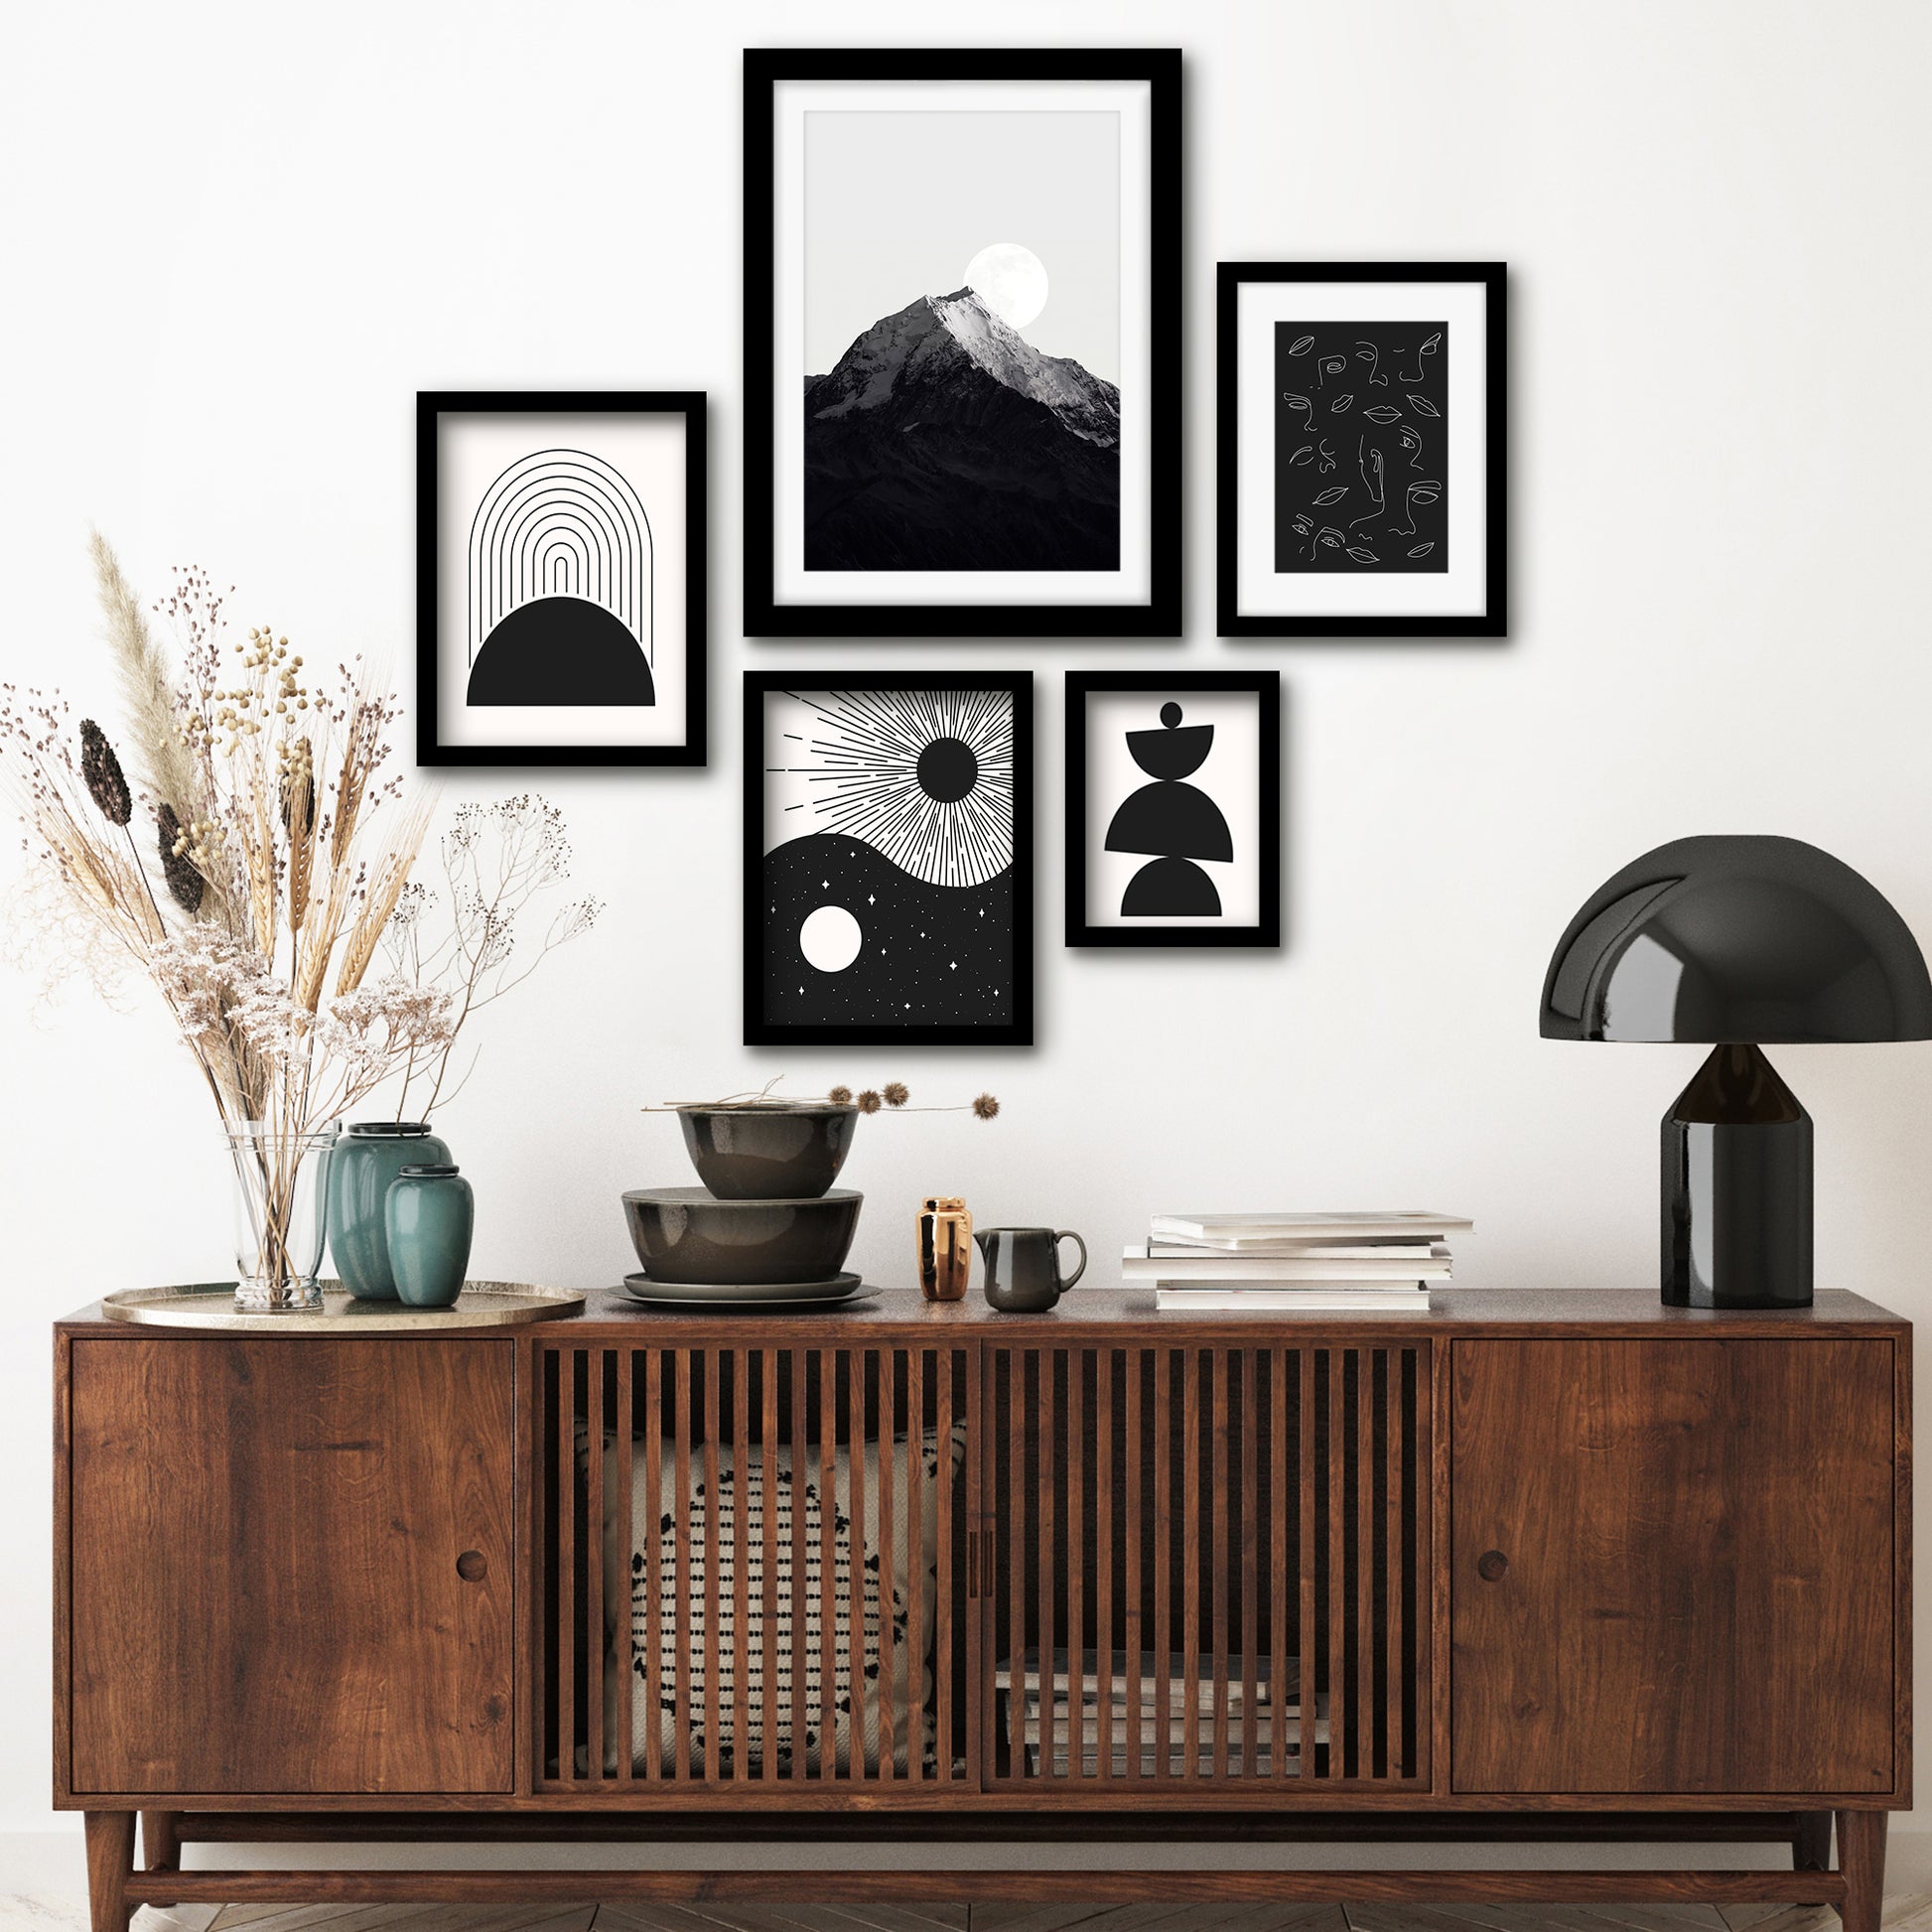 Americanflat 5 Piece Black Framed Gallery Wall Art Set - Black Abstract Balance L&scape